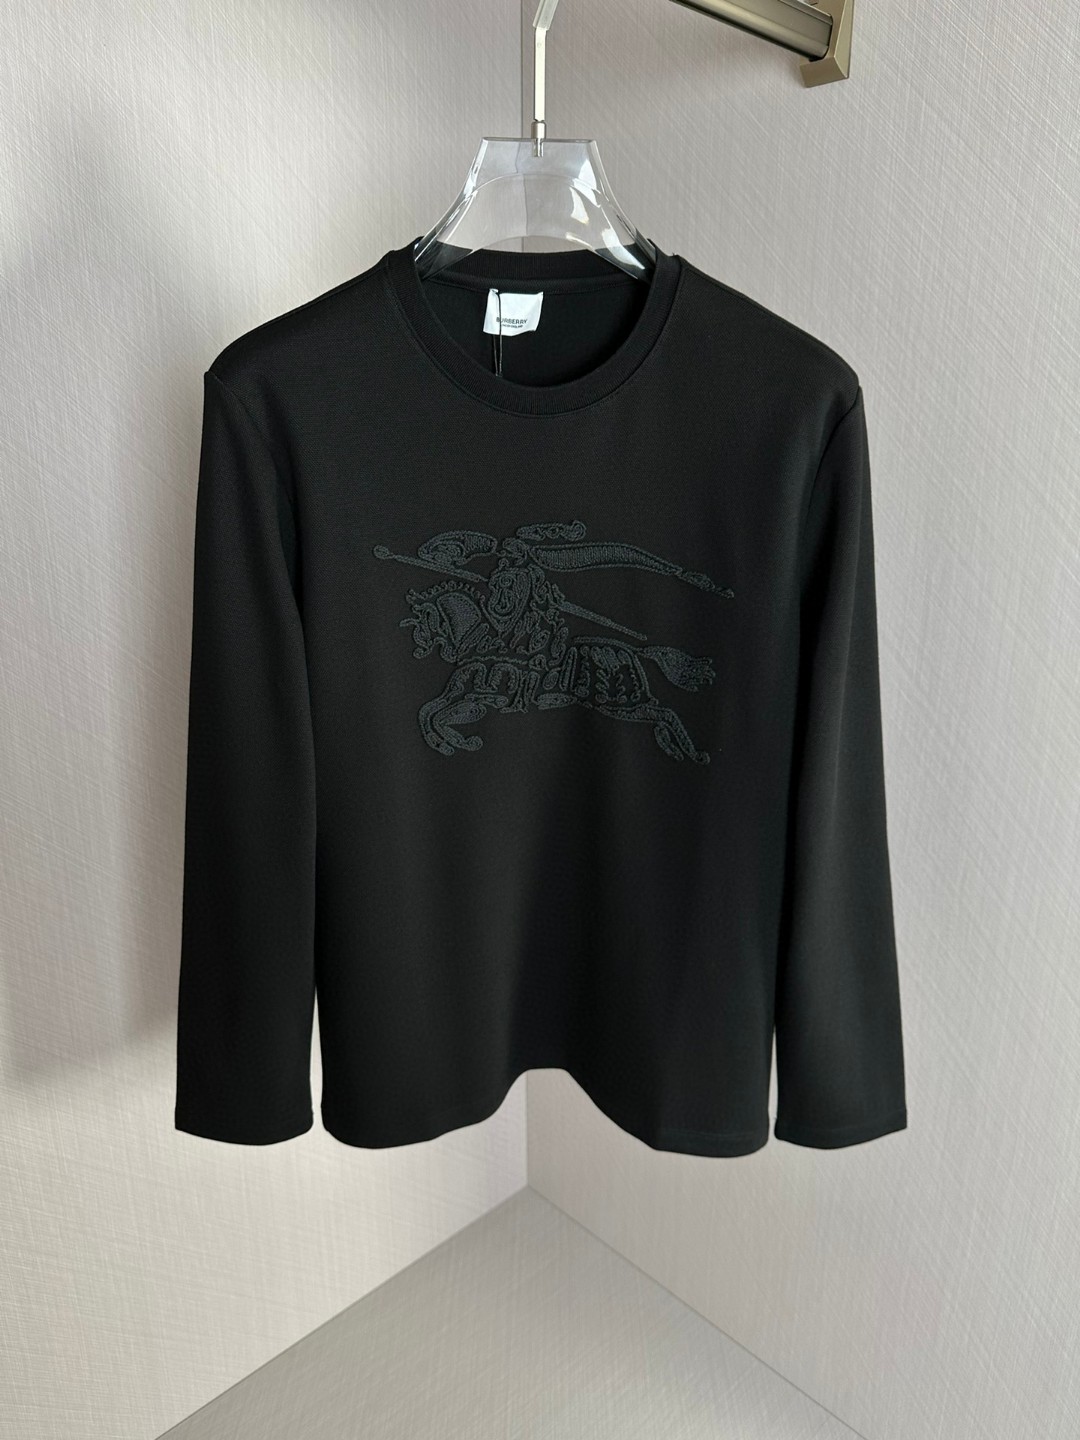 Burberry Clothing T-Shirt Embroidery Unisex Cotton Mercerized Spring/Summer Collection Fashion Long Sleeve